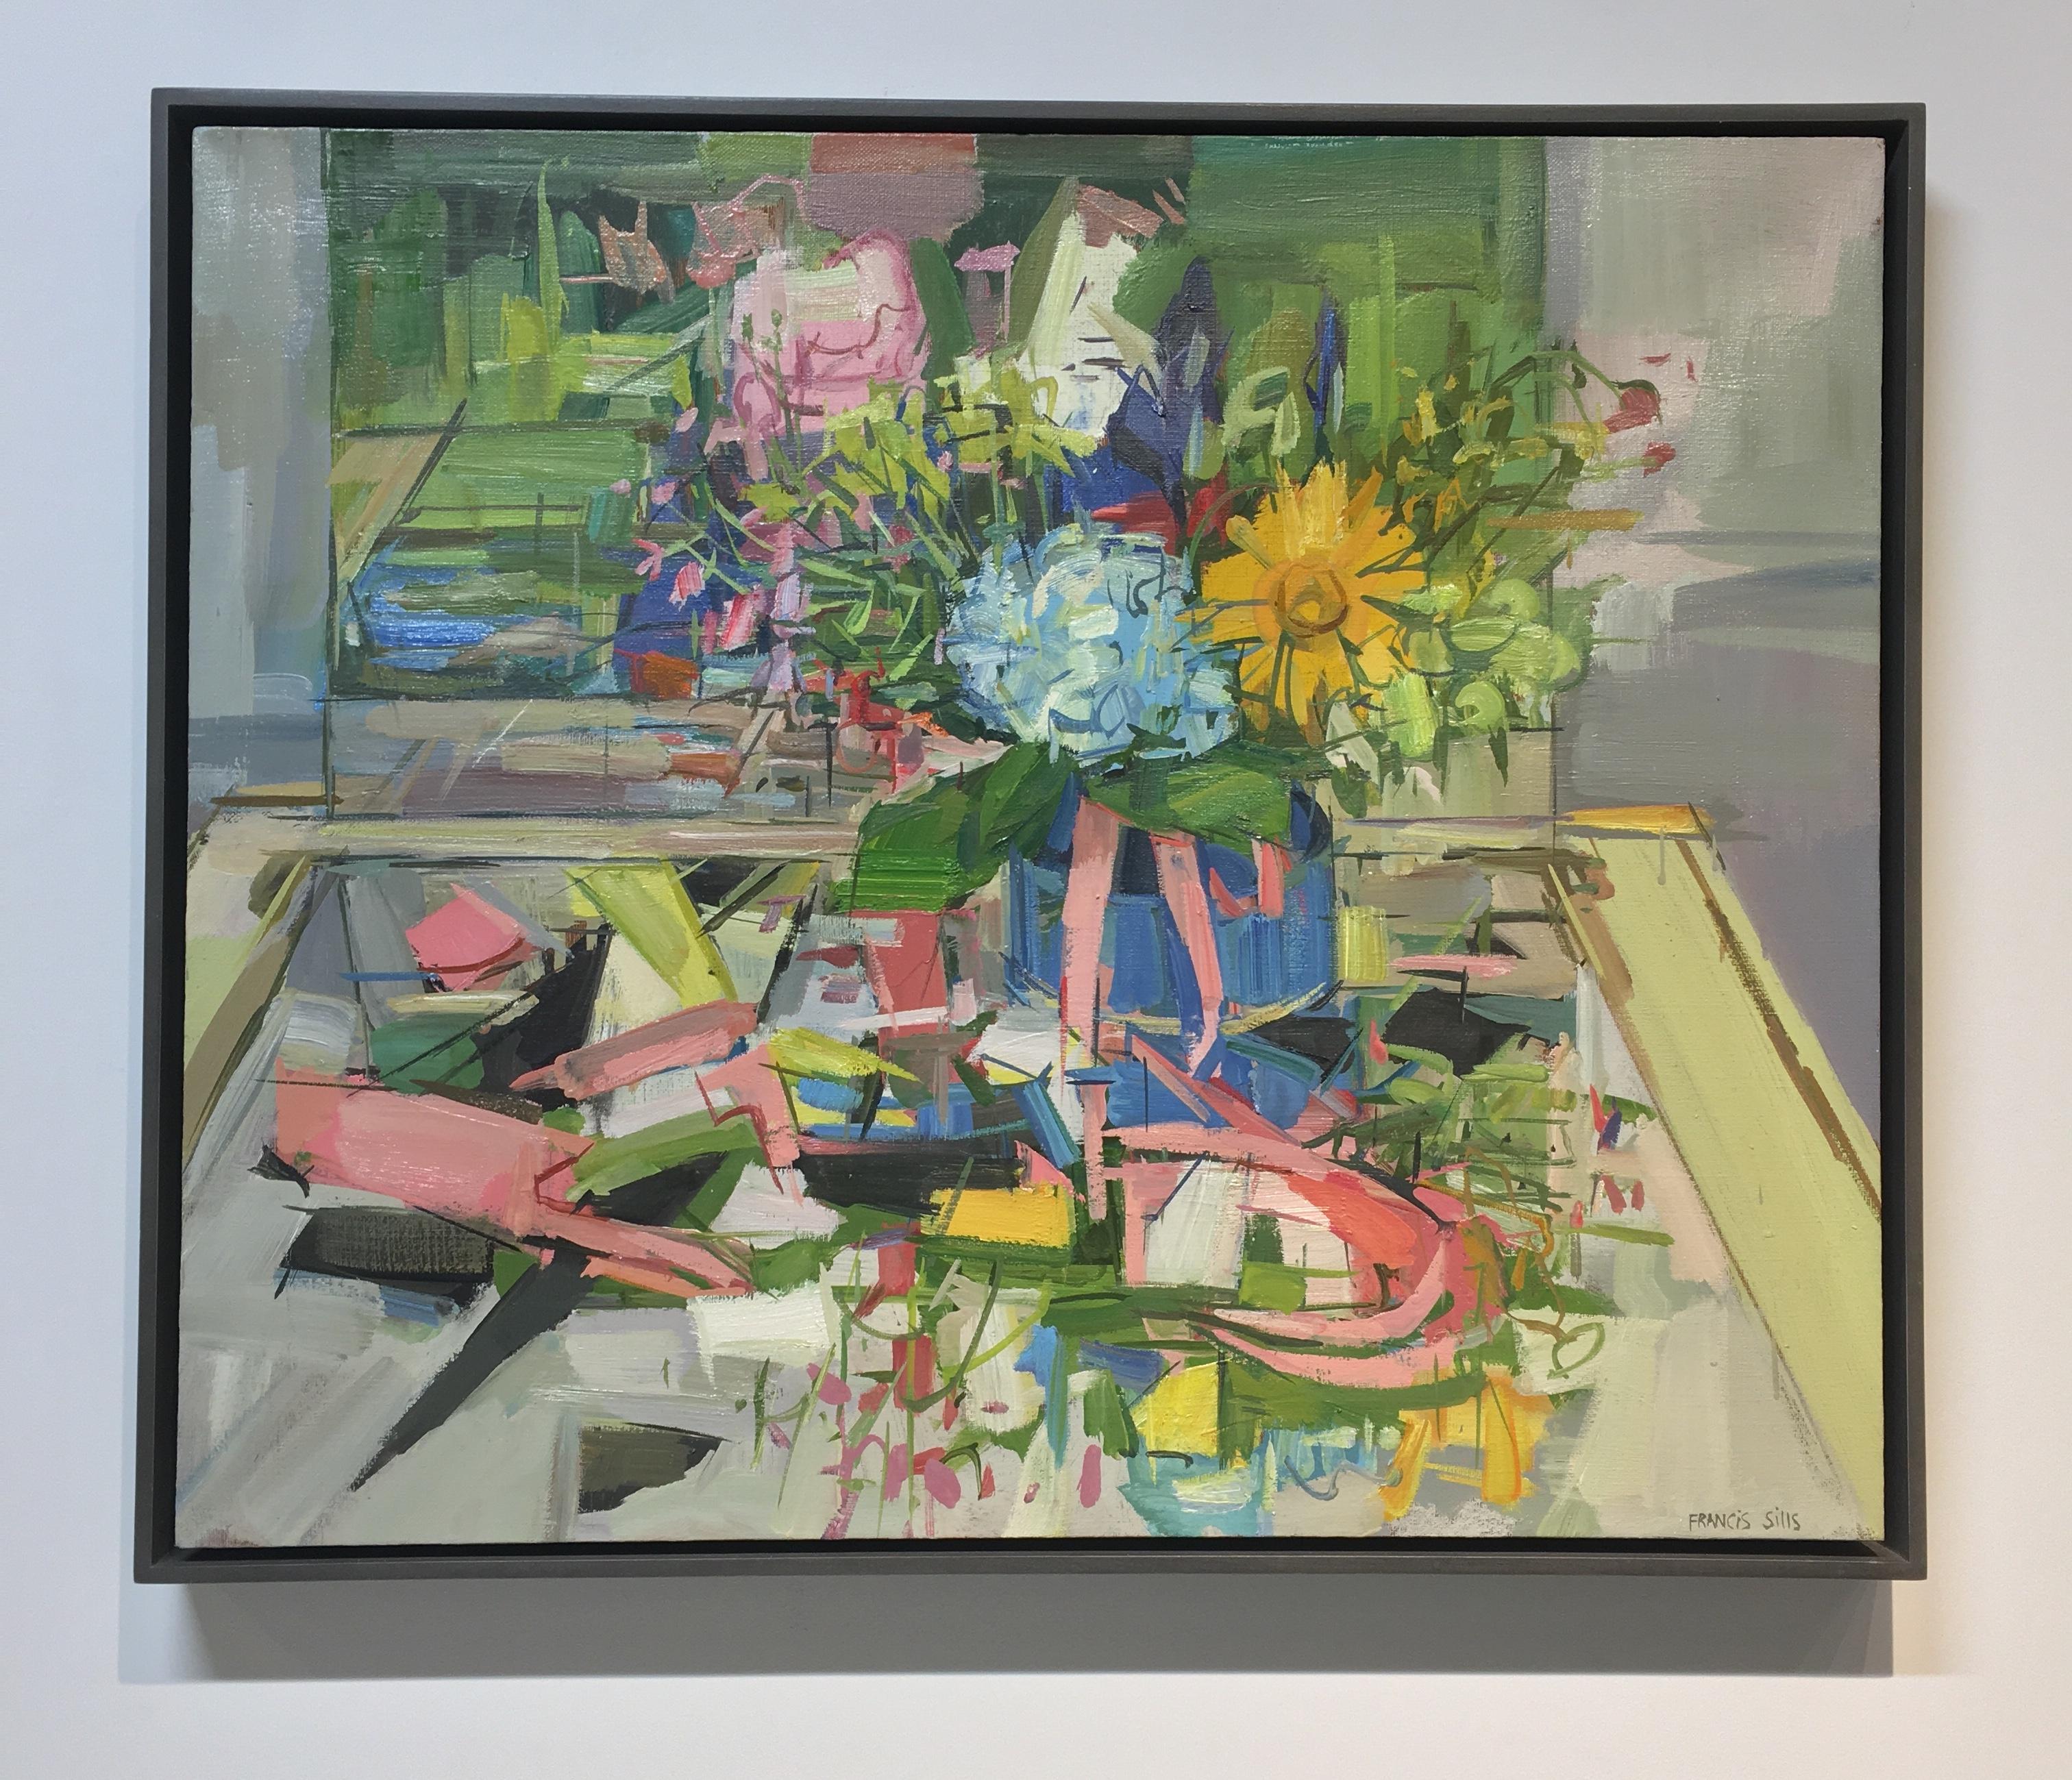 Floral Still Life II, Yellow, Blue, Pink and Green Flowers in Vase on Table - Painting by Francis Sills